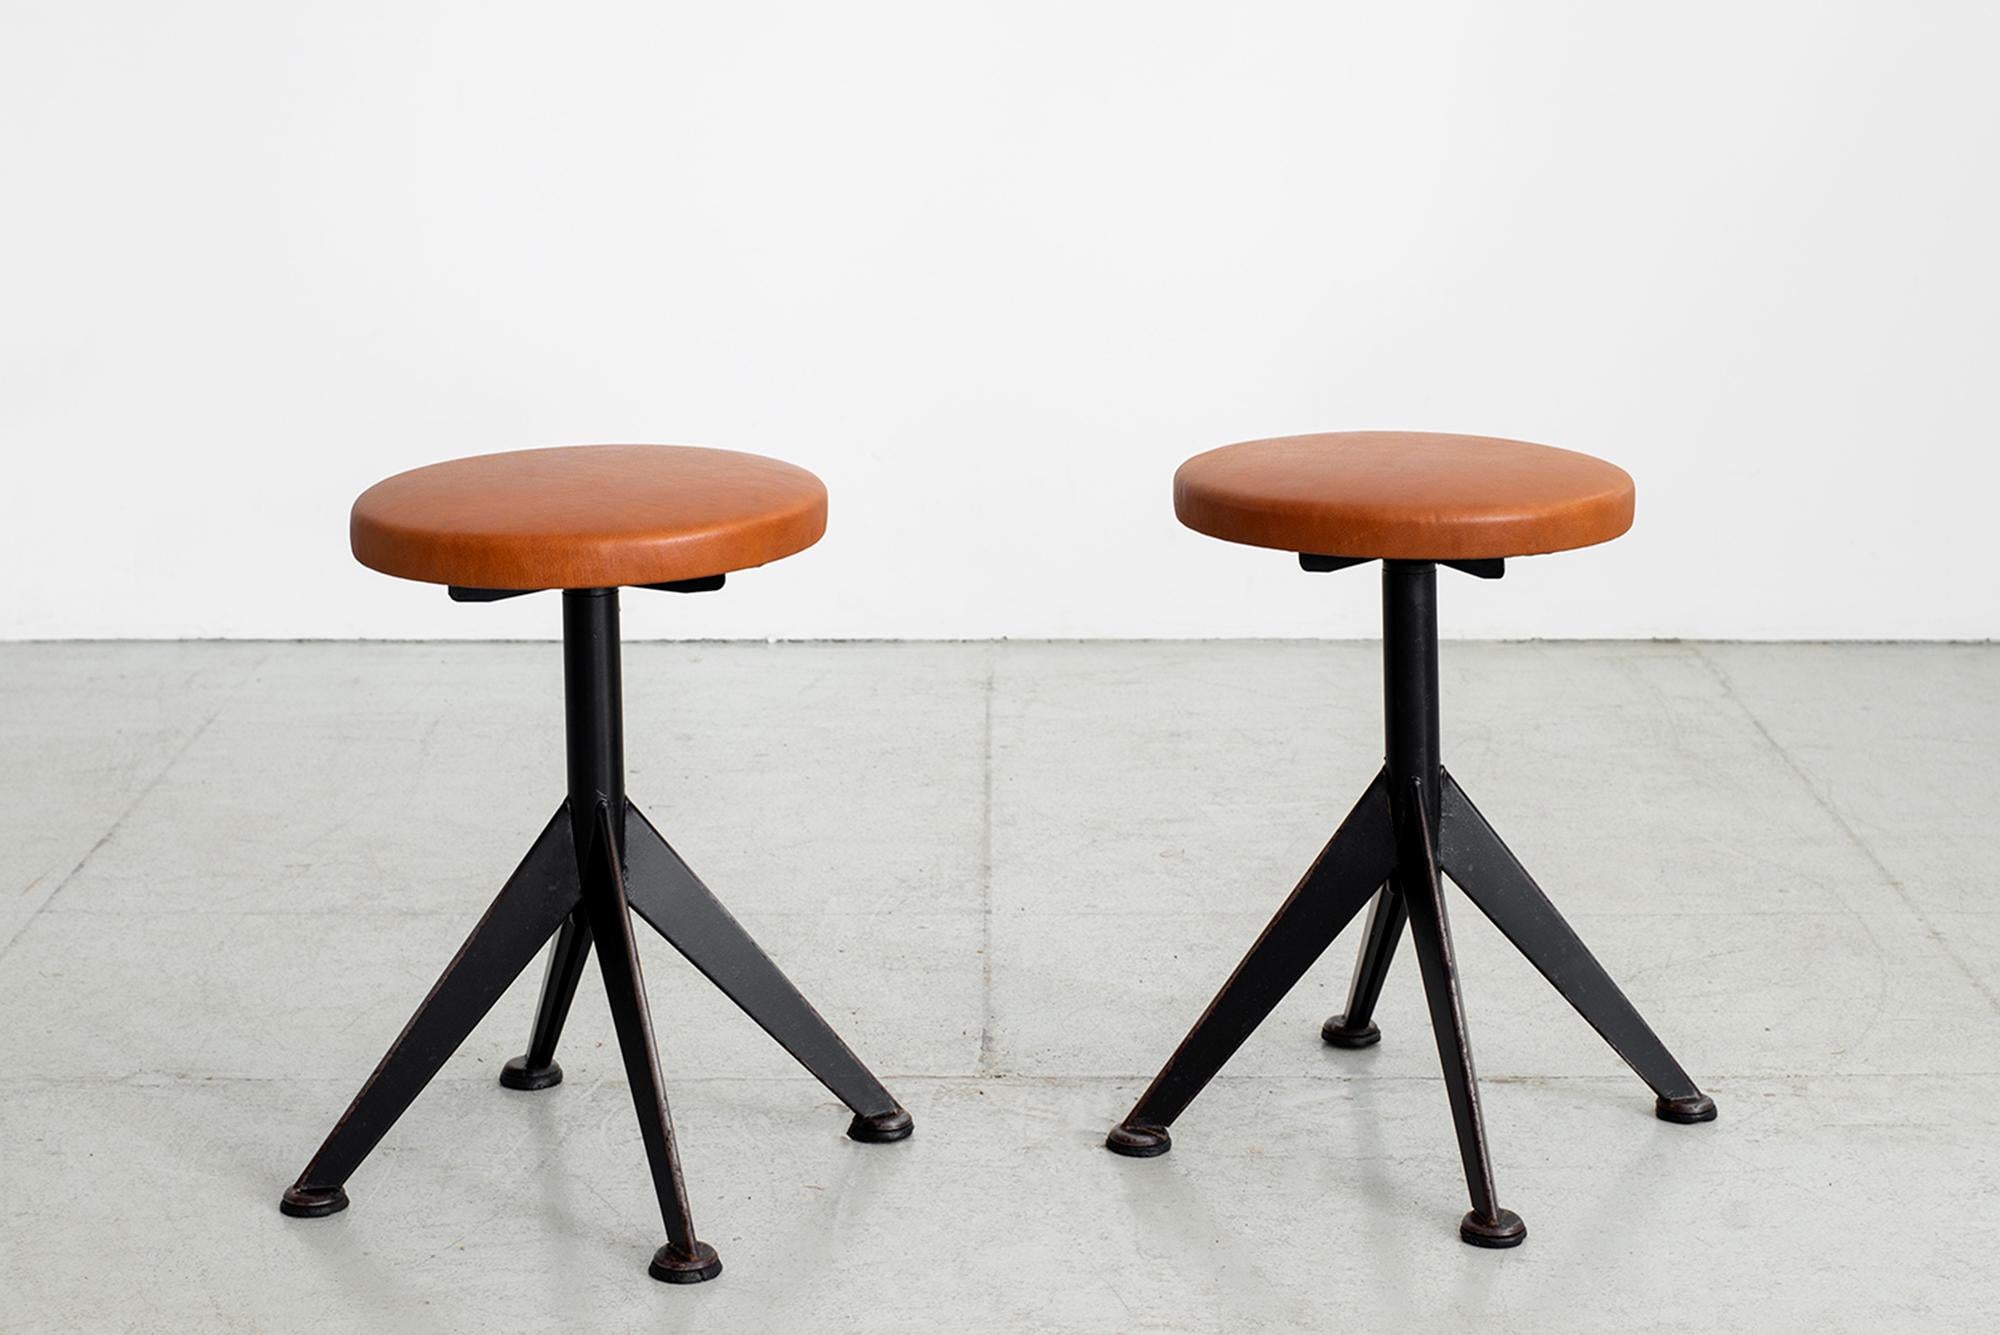 1950s Italian Industrial stool with heavy black enameled base and newly upholstered leather seats.
Priced separately.
   


  